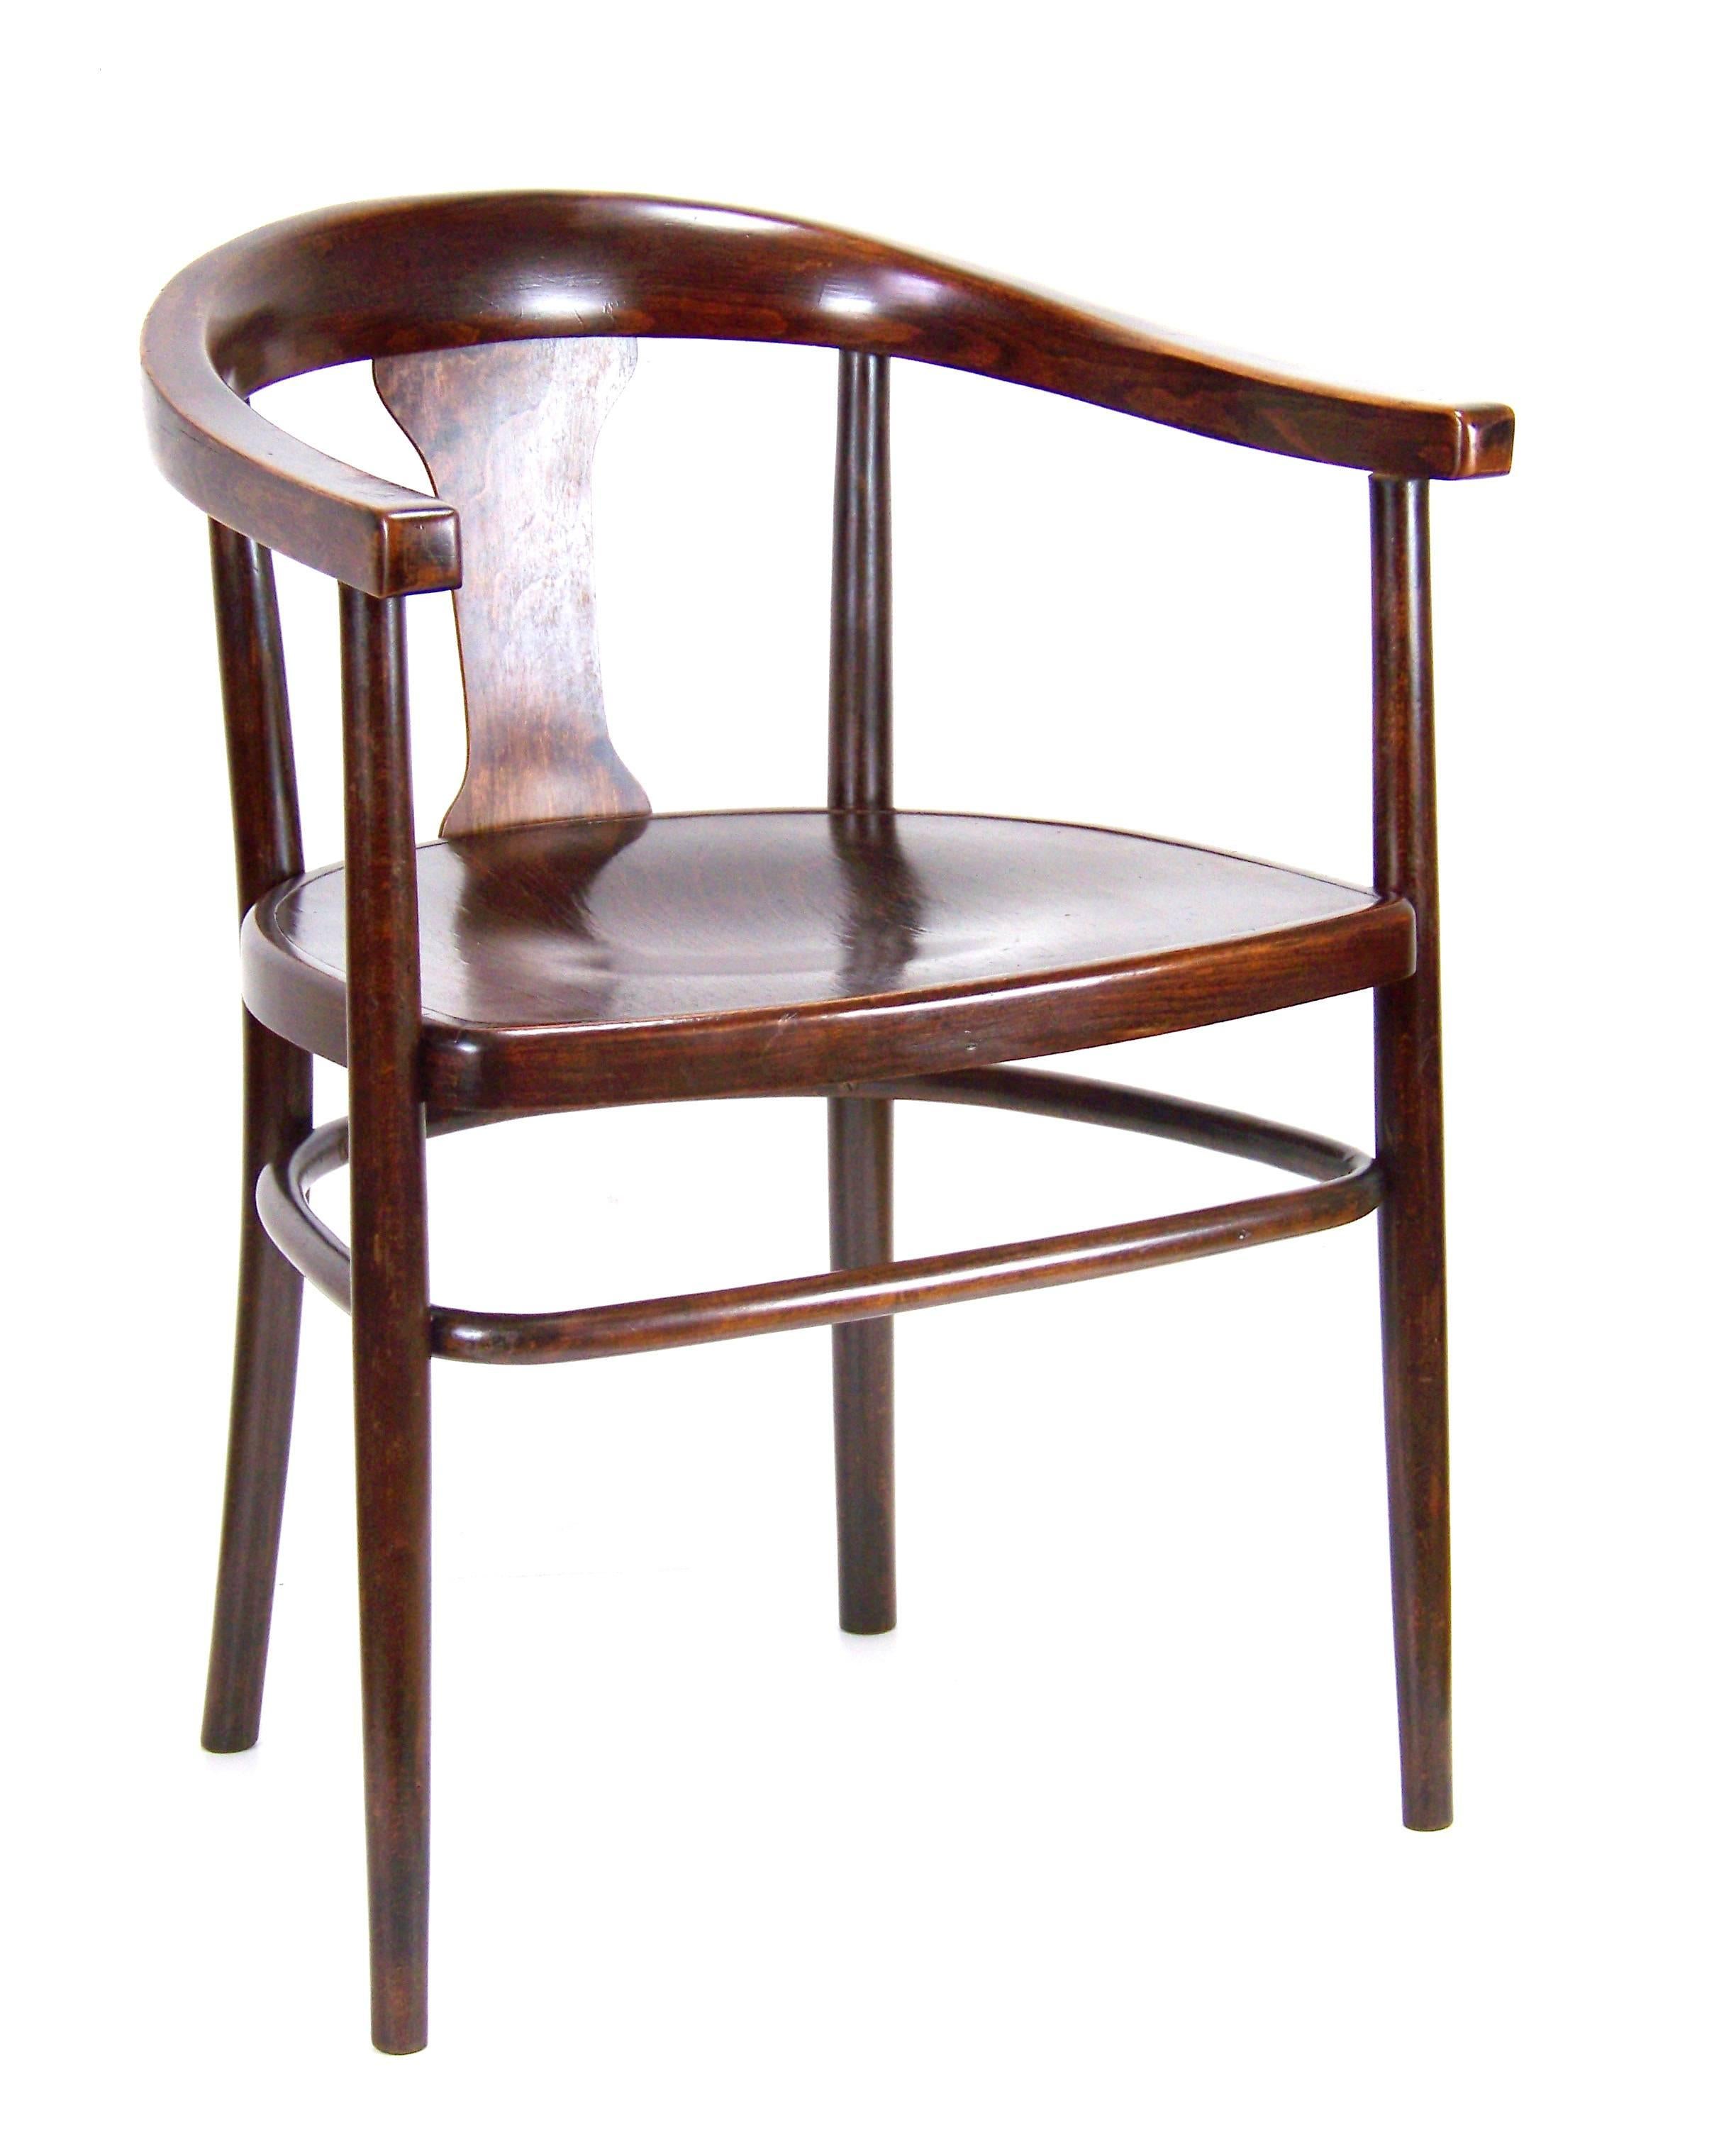 Designed in Austria by the Gebrüder Thonet company. Manufactured by the D.G.Fischel company (the third largest company of its kind). Included in the production program, circa 1910. Original 'Fischel' stamp from circa 1920. Armchair was cleaned and